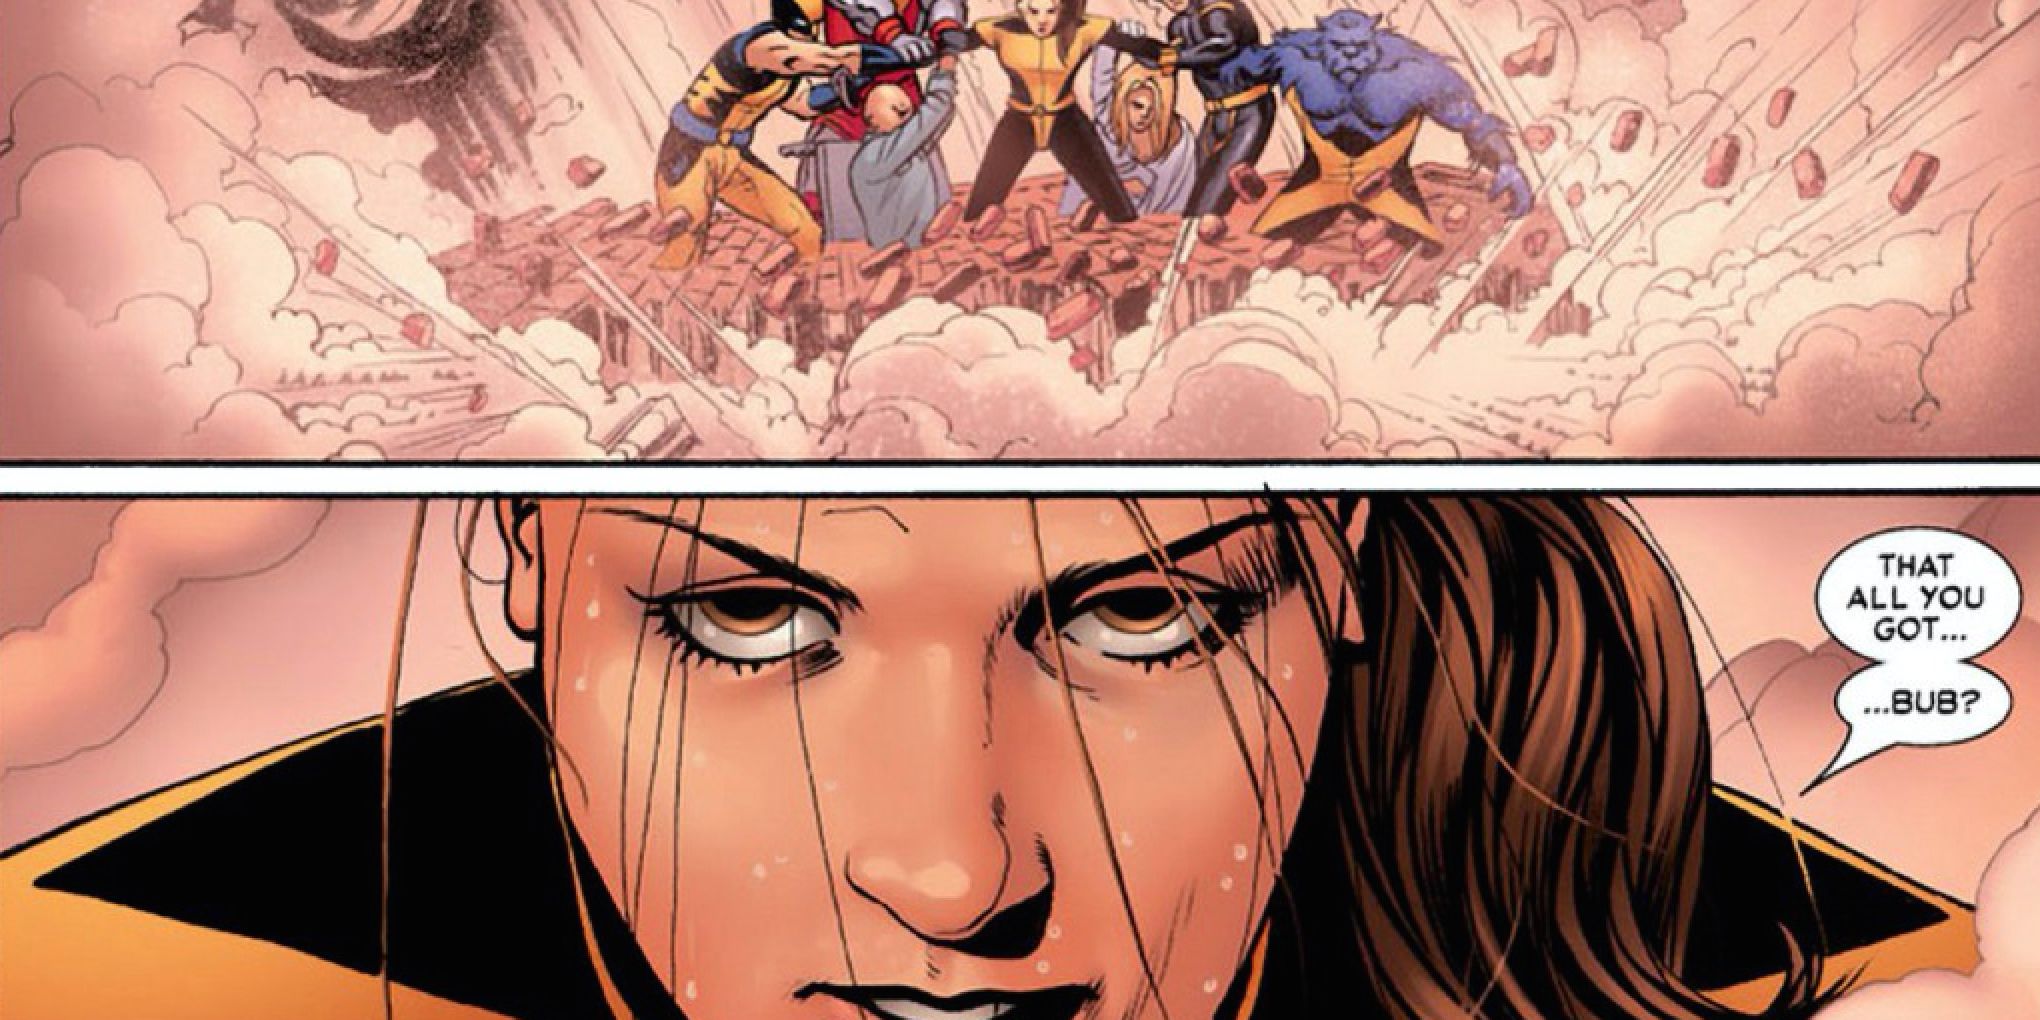 Kitty Pryde Protects The Team in Astonishing X-Men